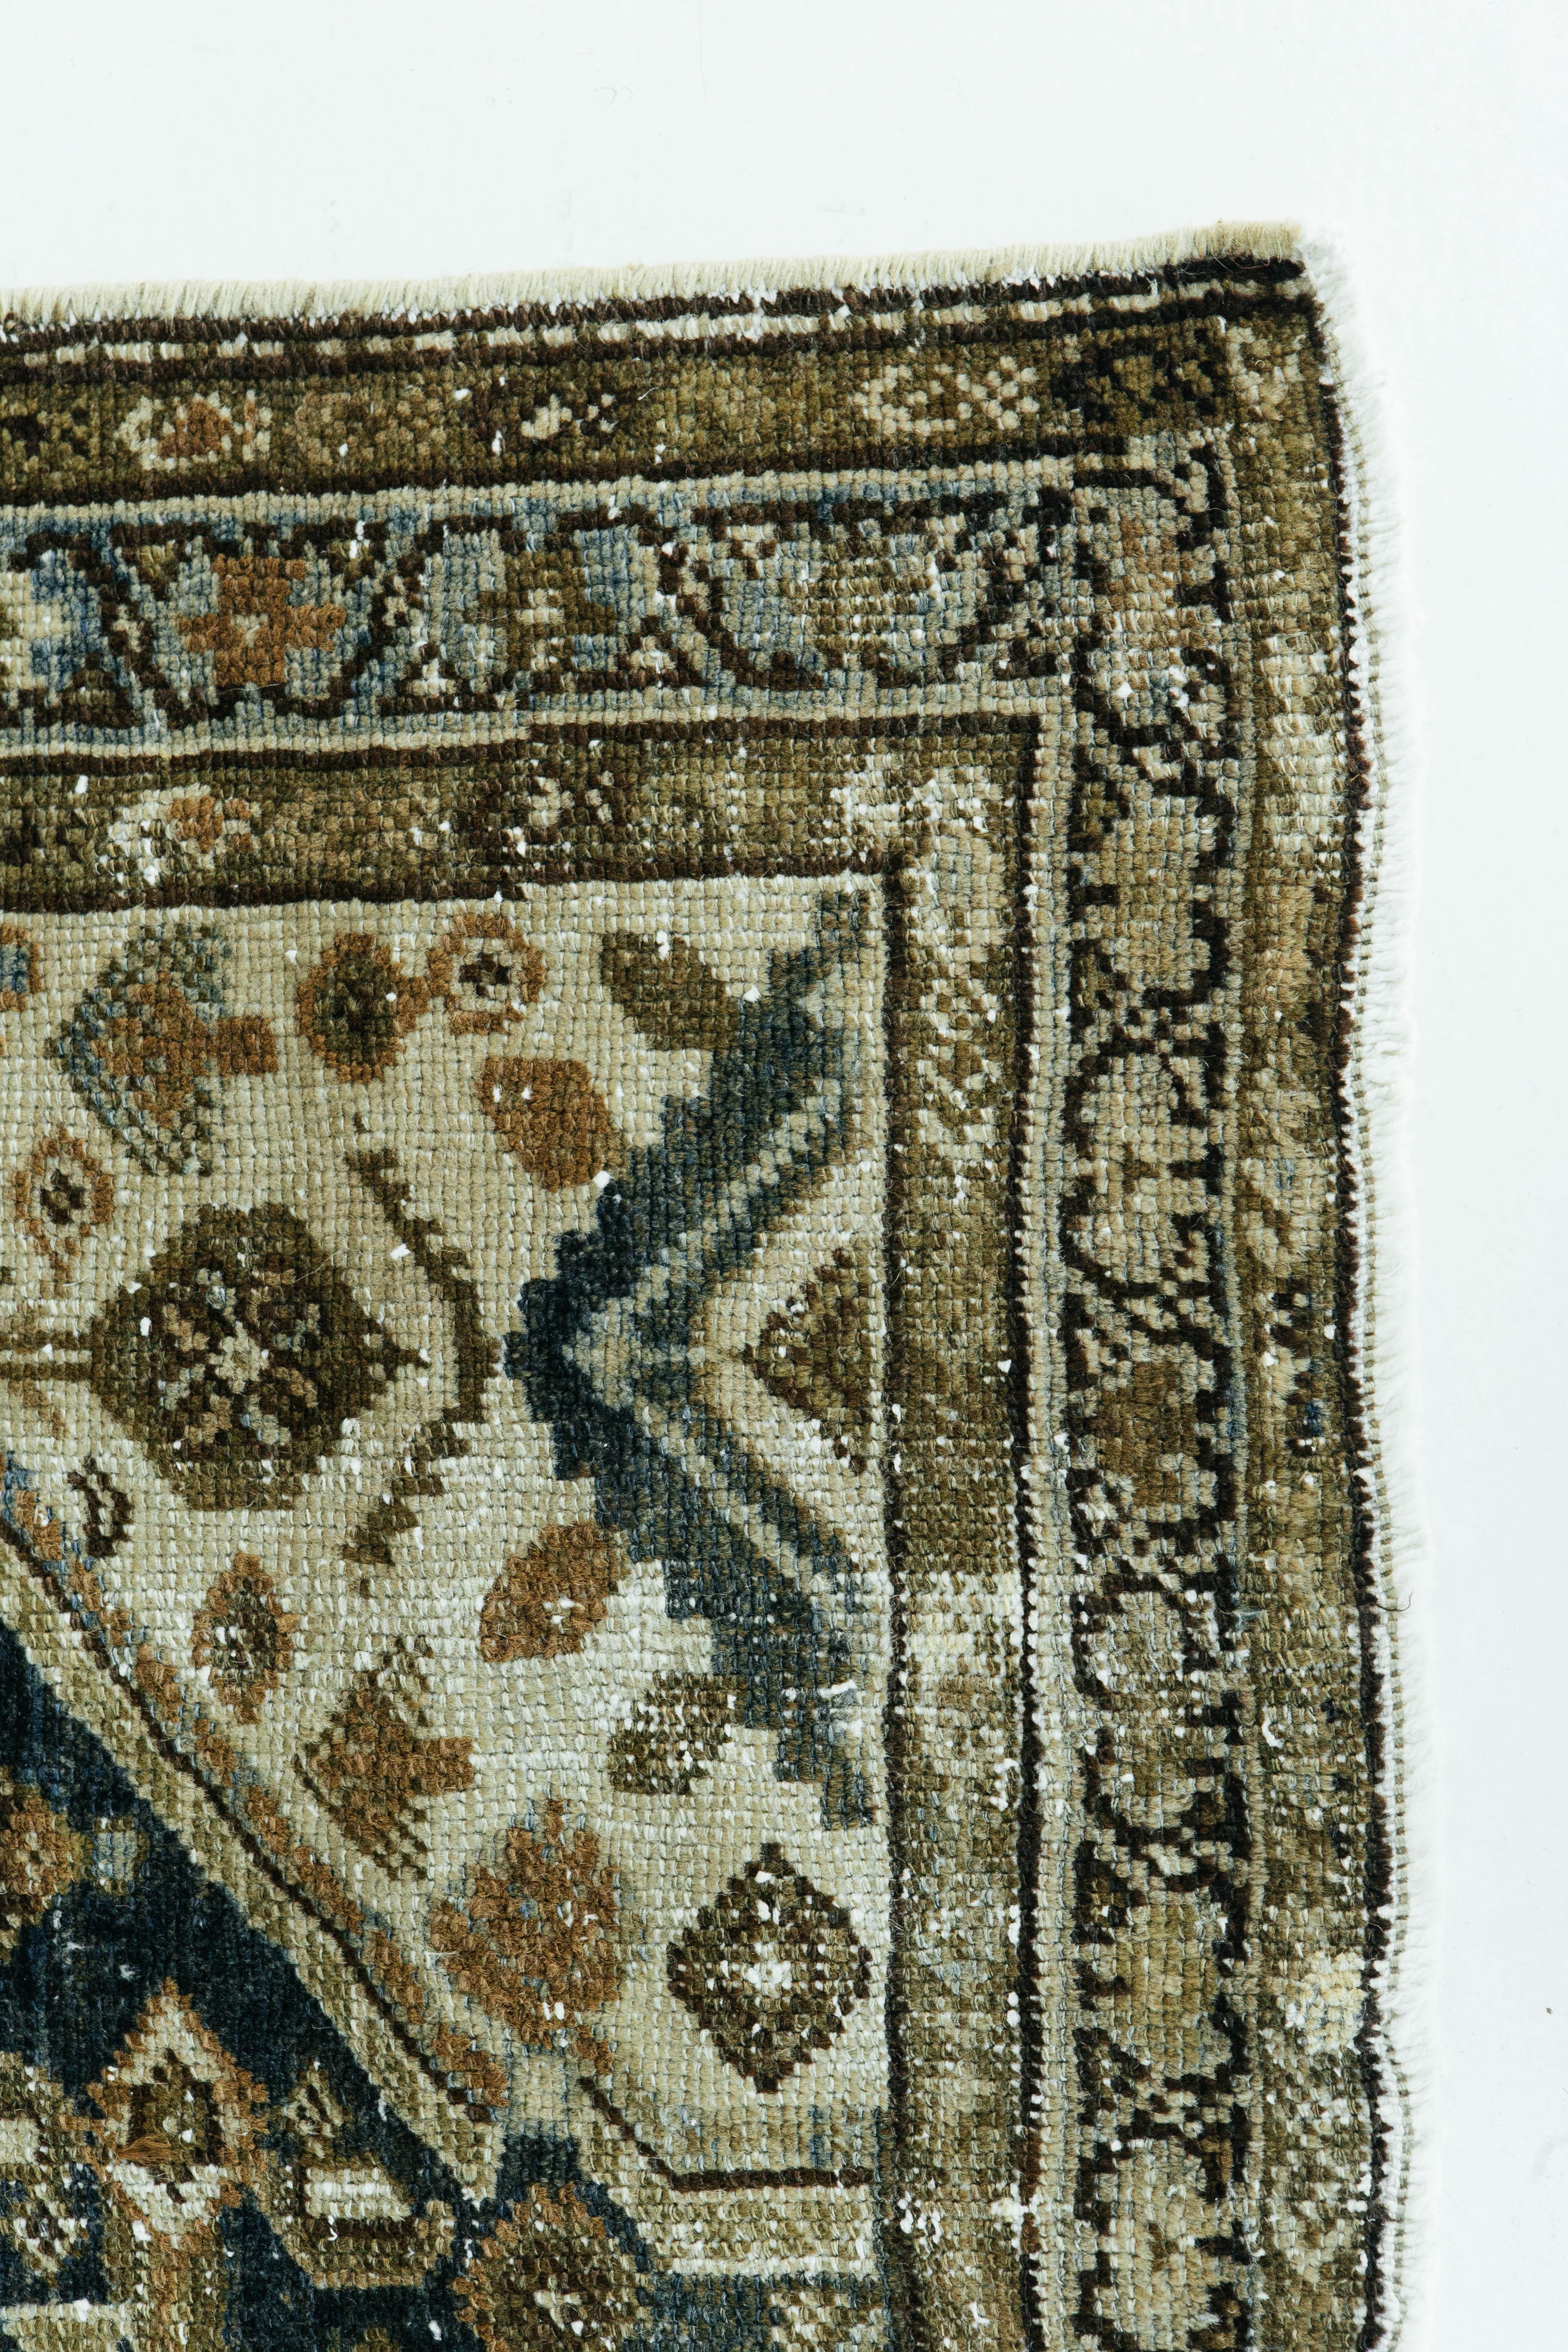 This Persian Malayer has bold and eye catching geometric shapes and patterns. In Malayer and the small villages surrounding it, production was mostly done by individual weavers in the 19th and early 20th centuries. Its distinct style and detailed